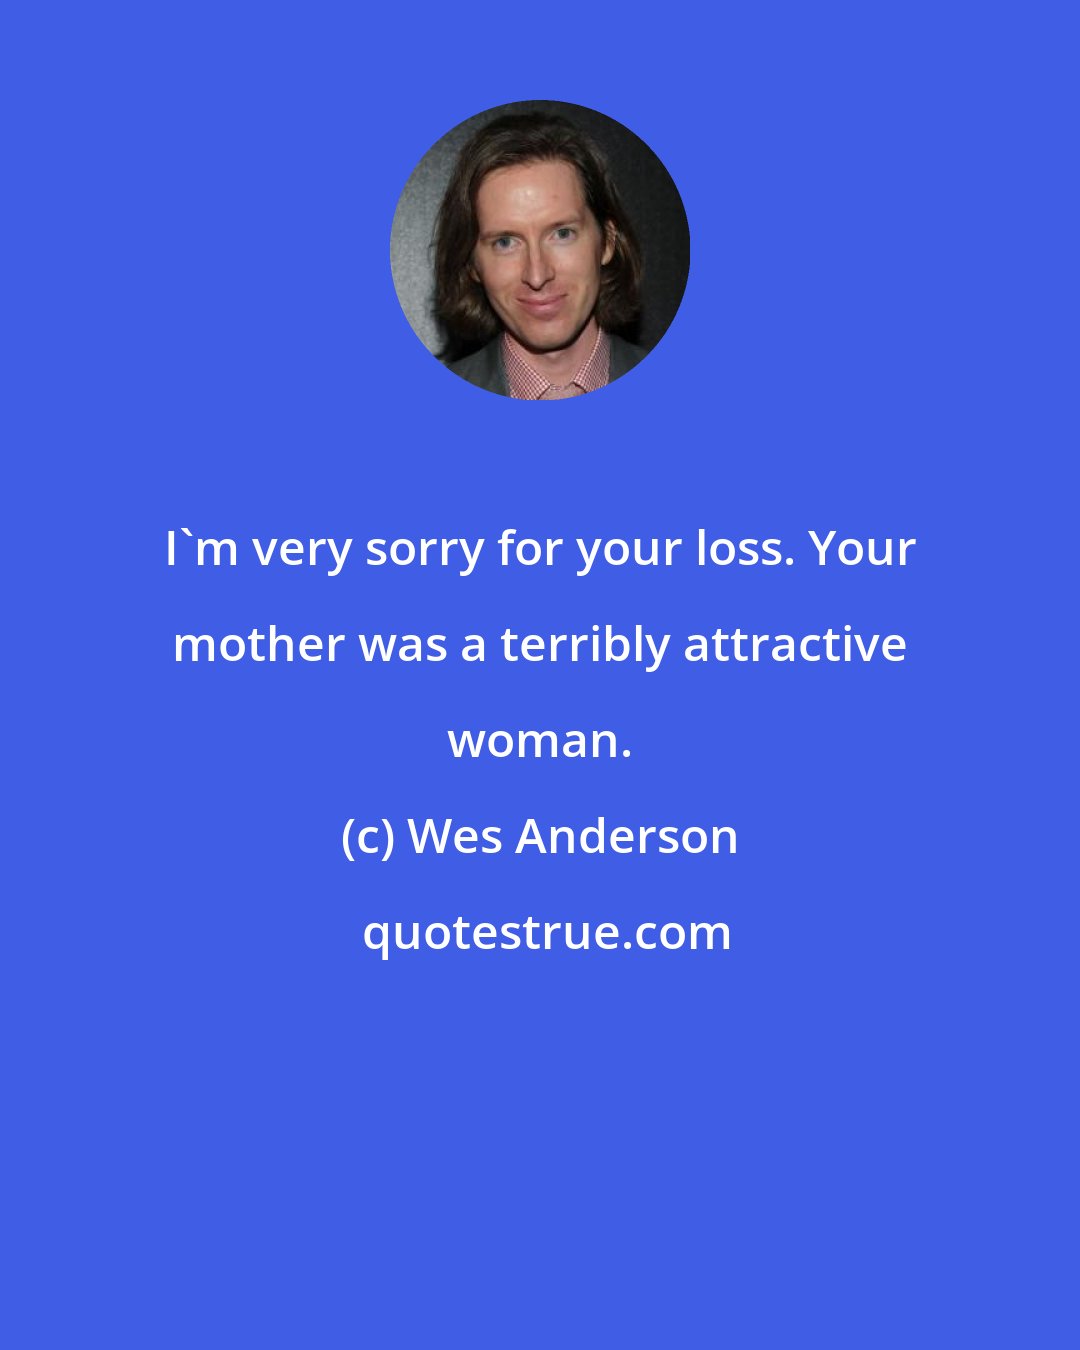 Wes Anderson: I'm very sorry for your loss. Your mother was a terribly attractive woman.